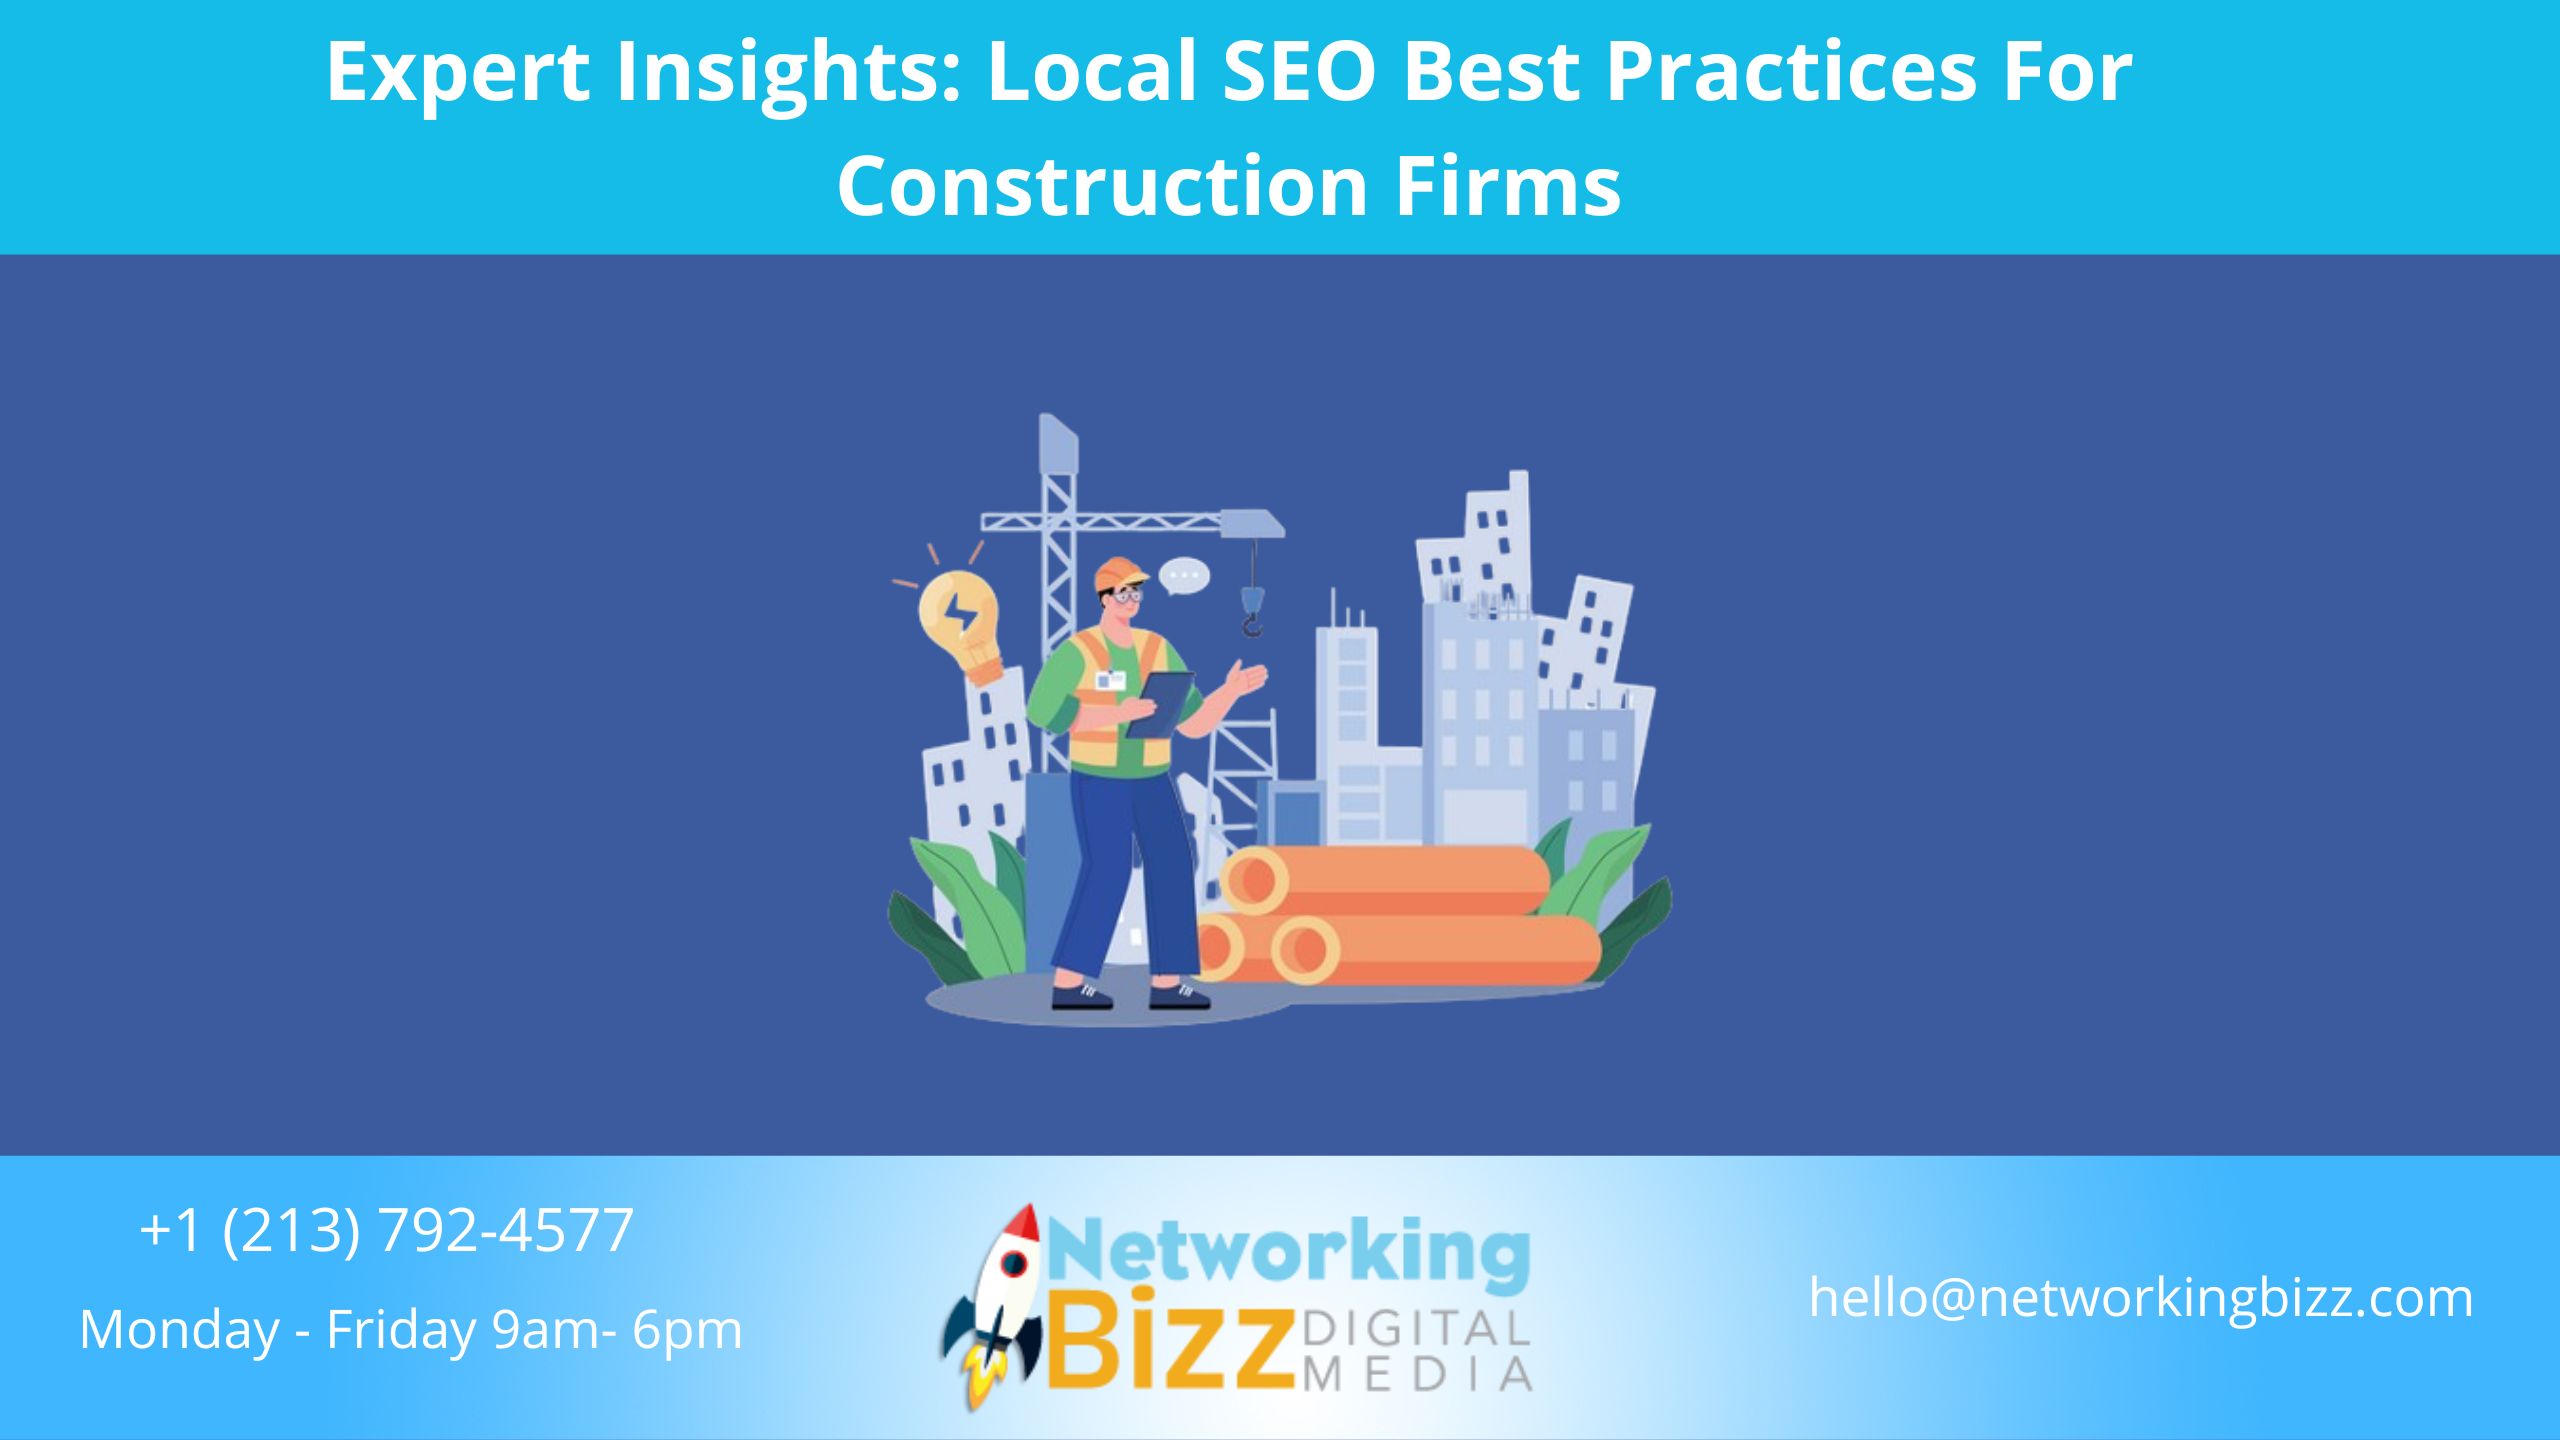 Expert Insights: Local SEO Best Practices For Construction Firms